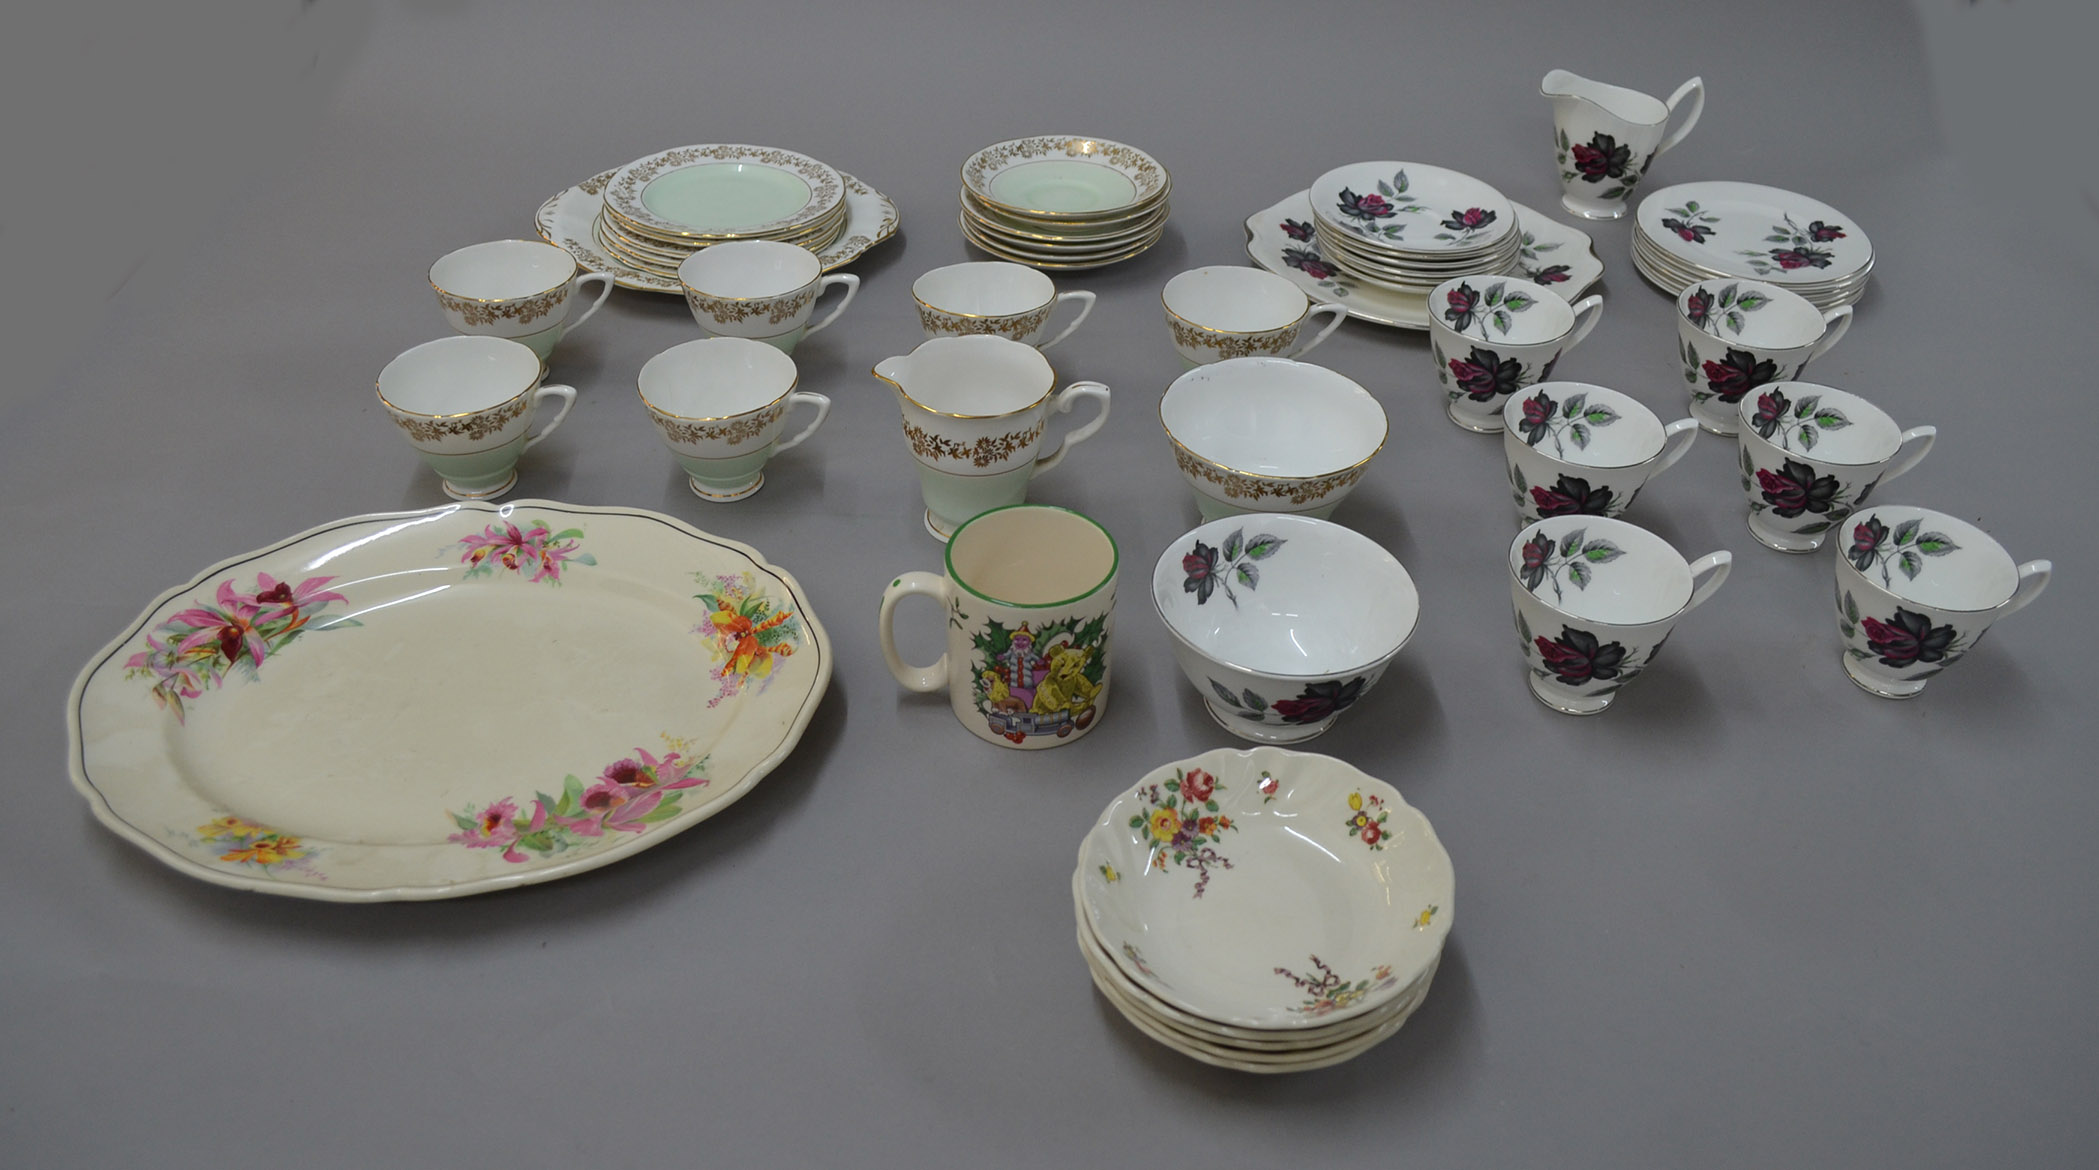 Royal Albert service comprising 21 pieces with black and red rose pattern, together with some